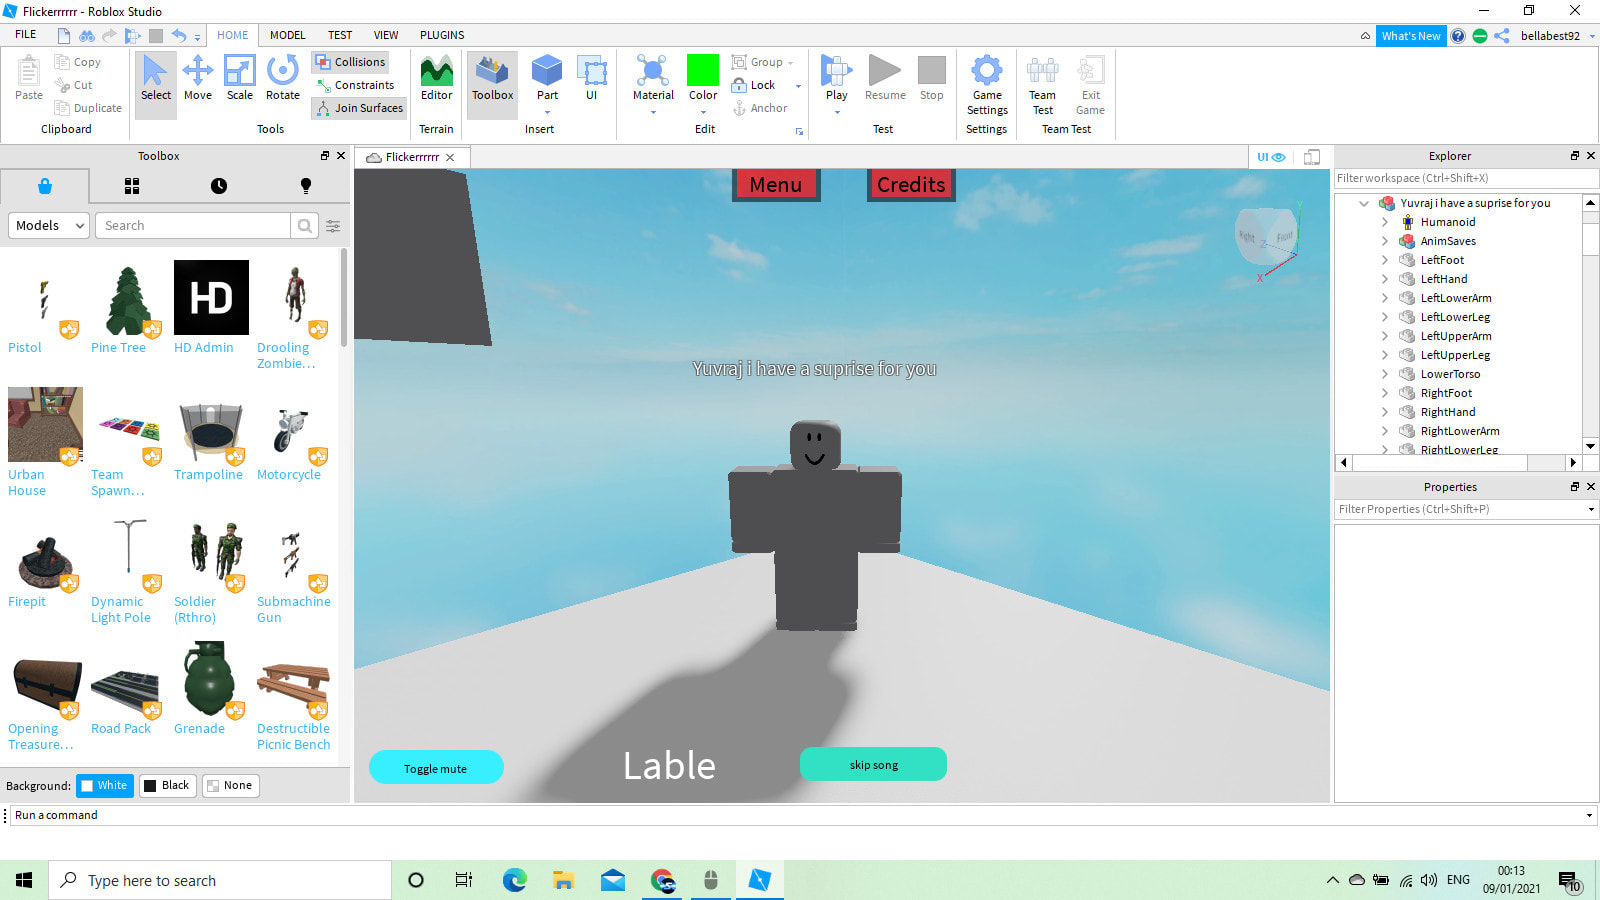 Make A Roblox Gamepass Menu Or A Normal Menue By Ssiiper Fiverr - roblox how to makea game pass